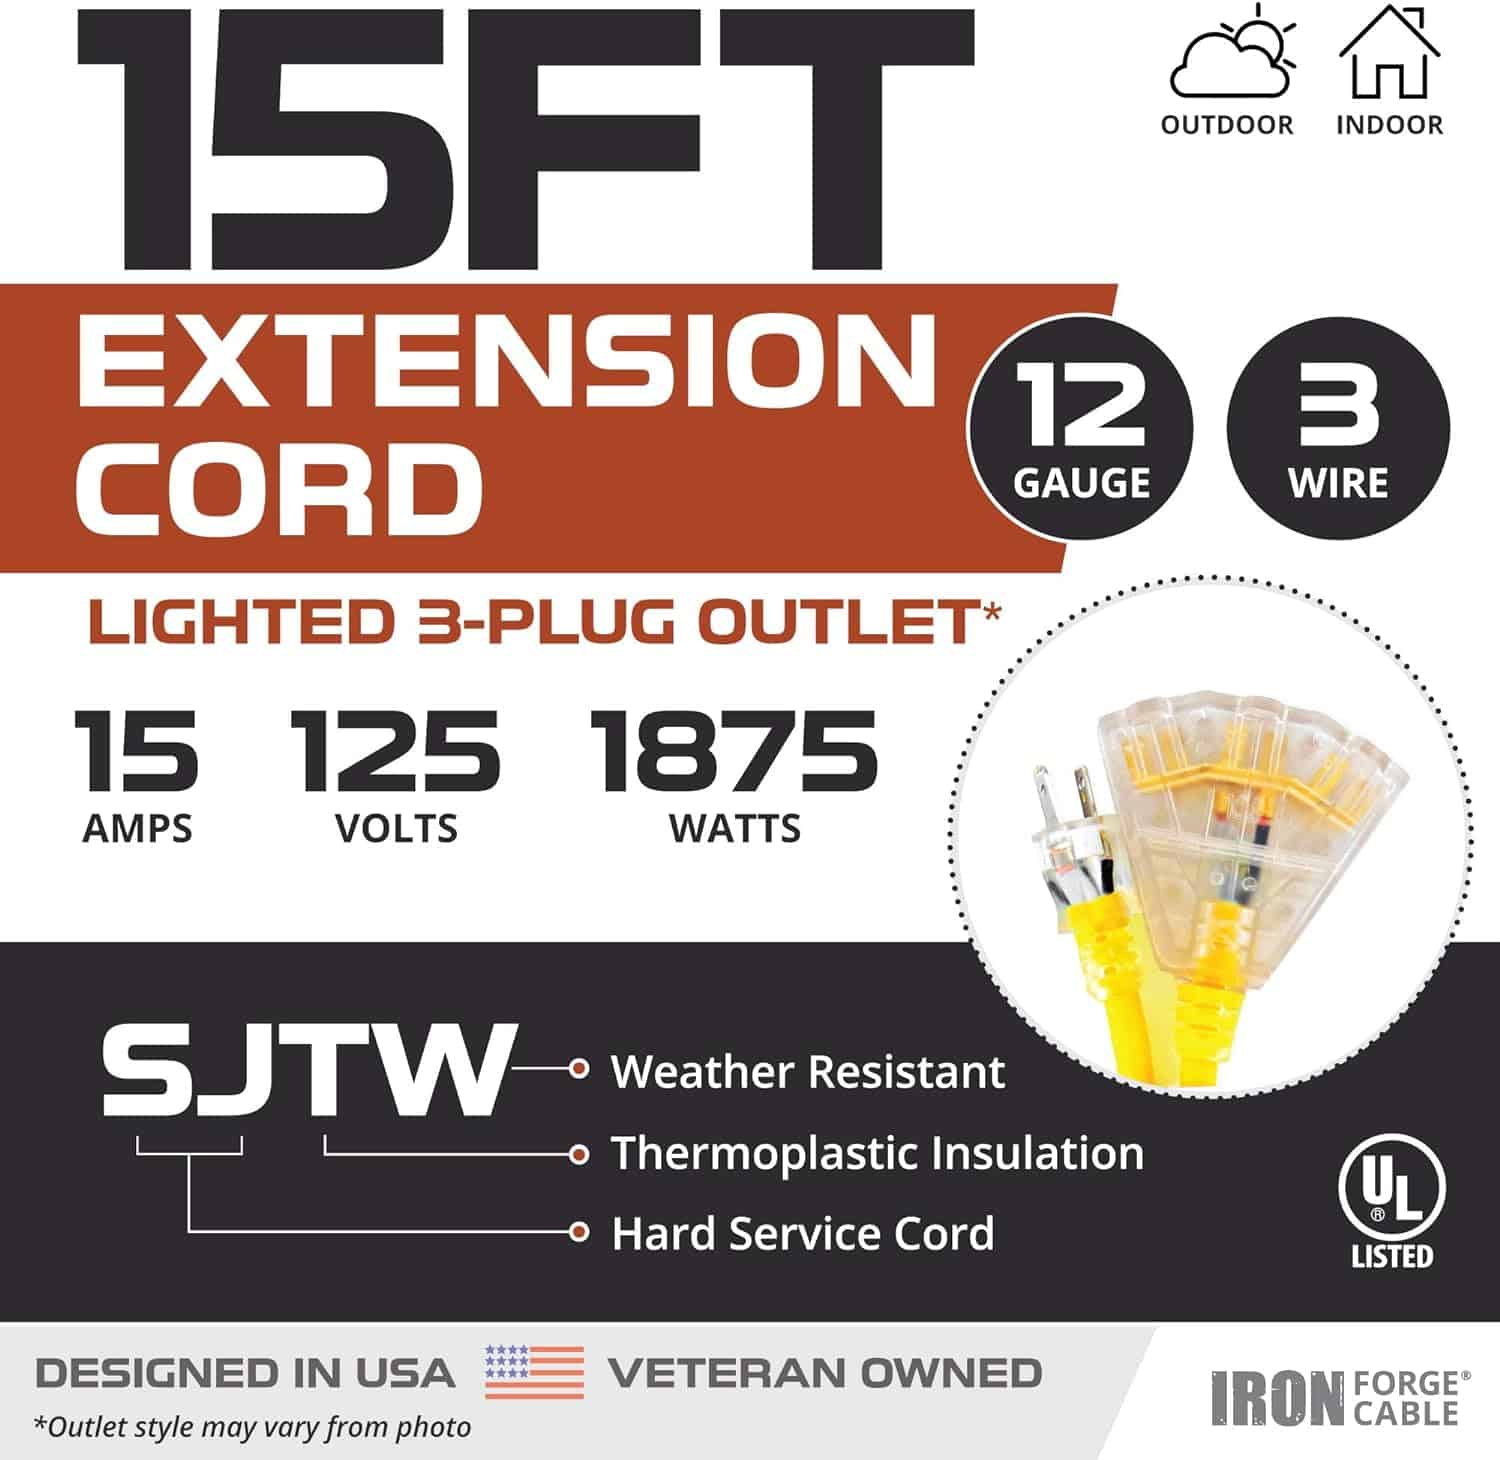 IRON-FORGE-CABLE-15-Foot-Lighted-Outdoor-Extension-Cord-with-3-Electrical-Power-Outlets-12-3-SJTW-Heavy-Duty-Yellow-Extension-Cable-with-3-Prong-Grounded-Plug-for-Safety